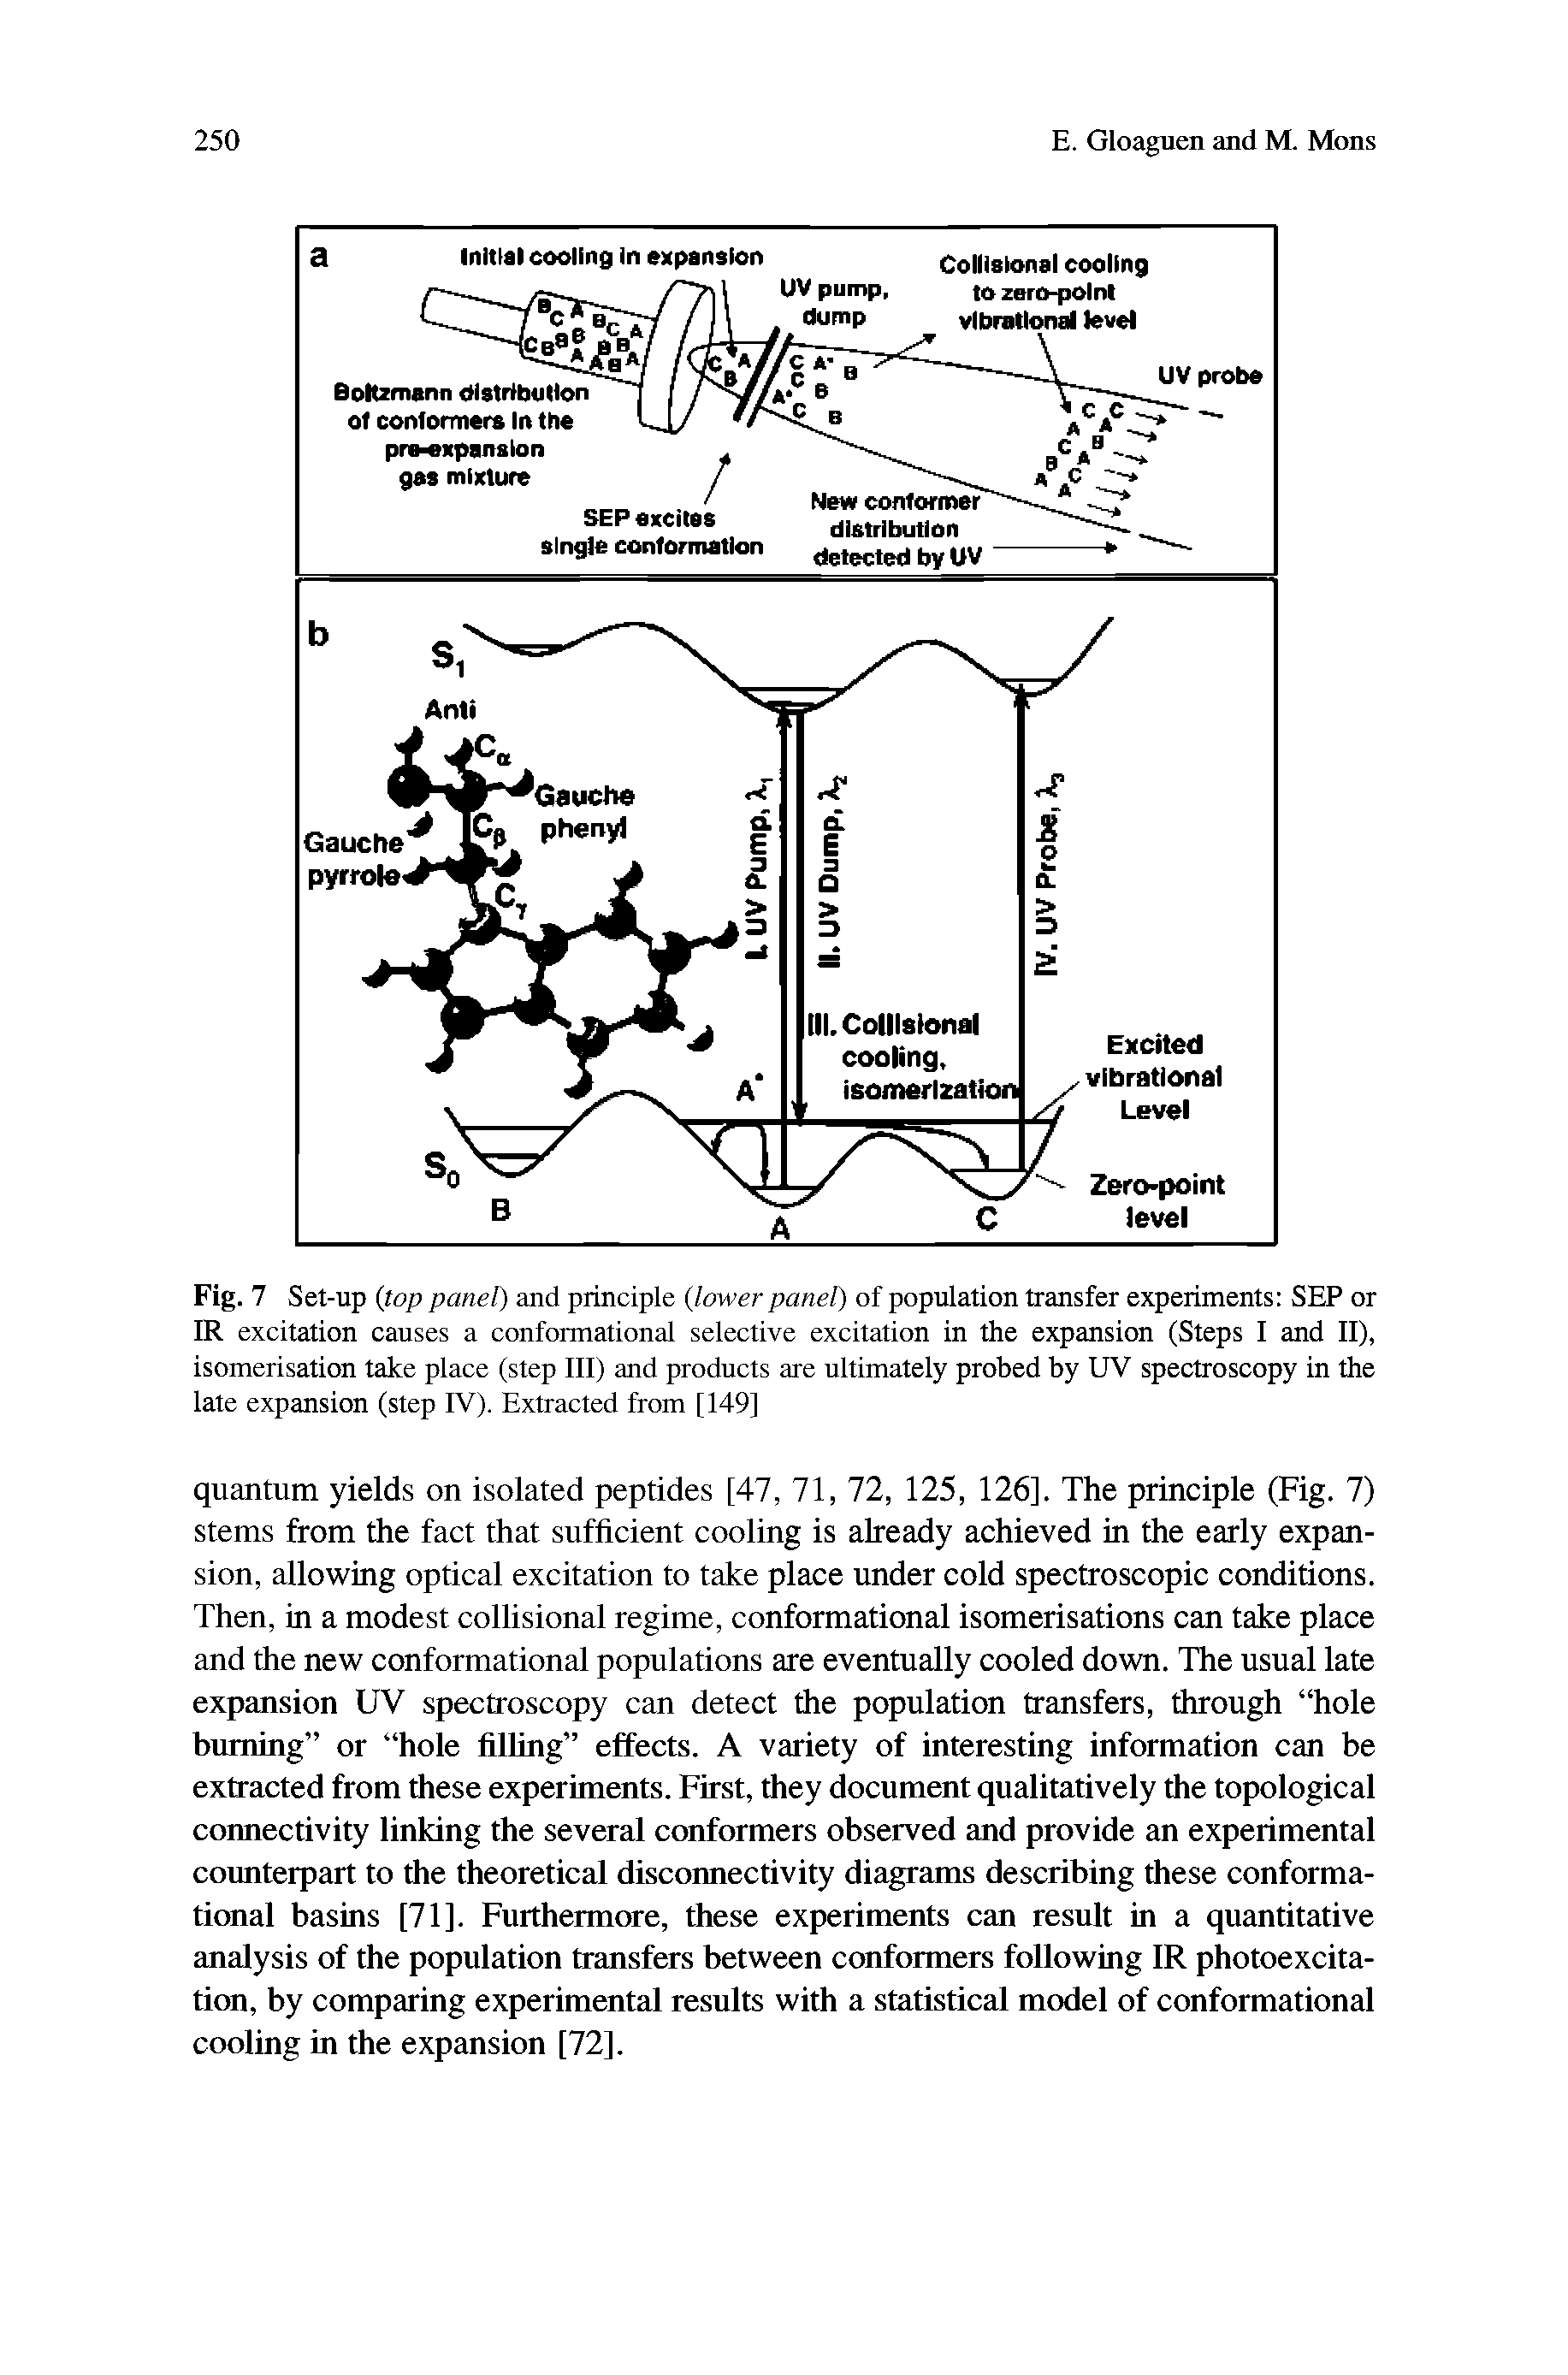 Fig. 7 Set-up top panel) and principle lower panel) of population transfer experiments SEP or IR excitation causes a conformational selective excitation in the expansion (Steps I and II), isomerisation take place (step III) and products are ultimately probed by UV spectroscopy in the late expansion (step IV). Extracted from [149]...